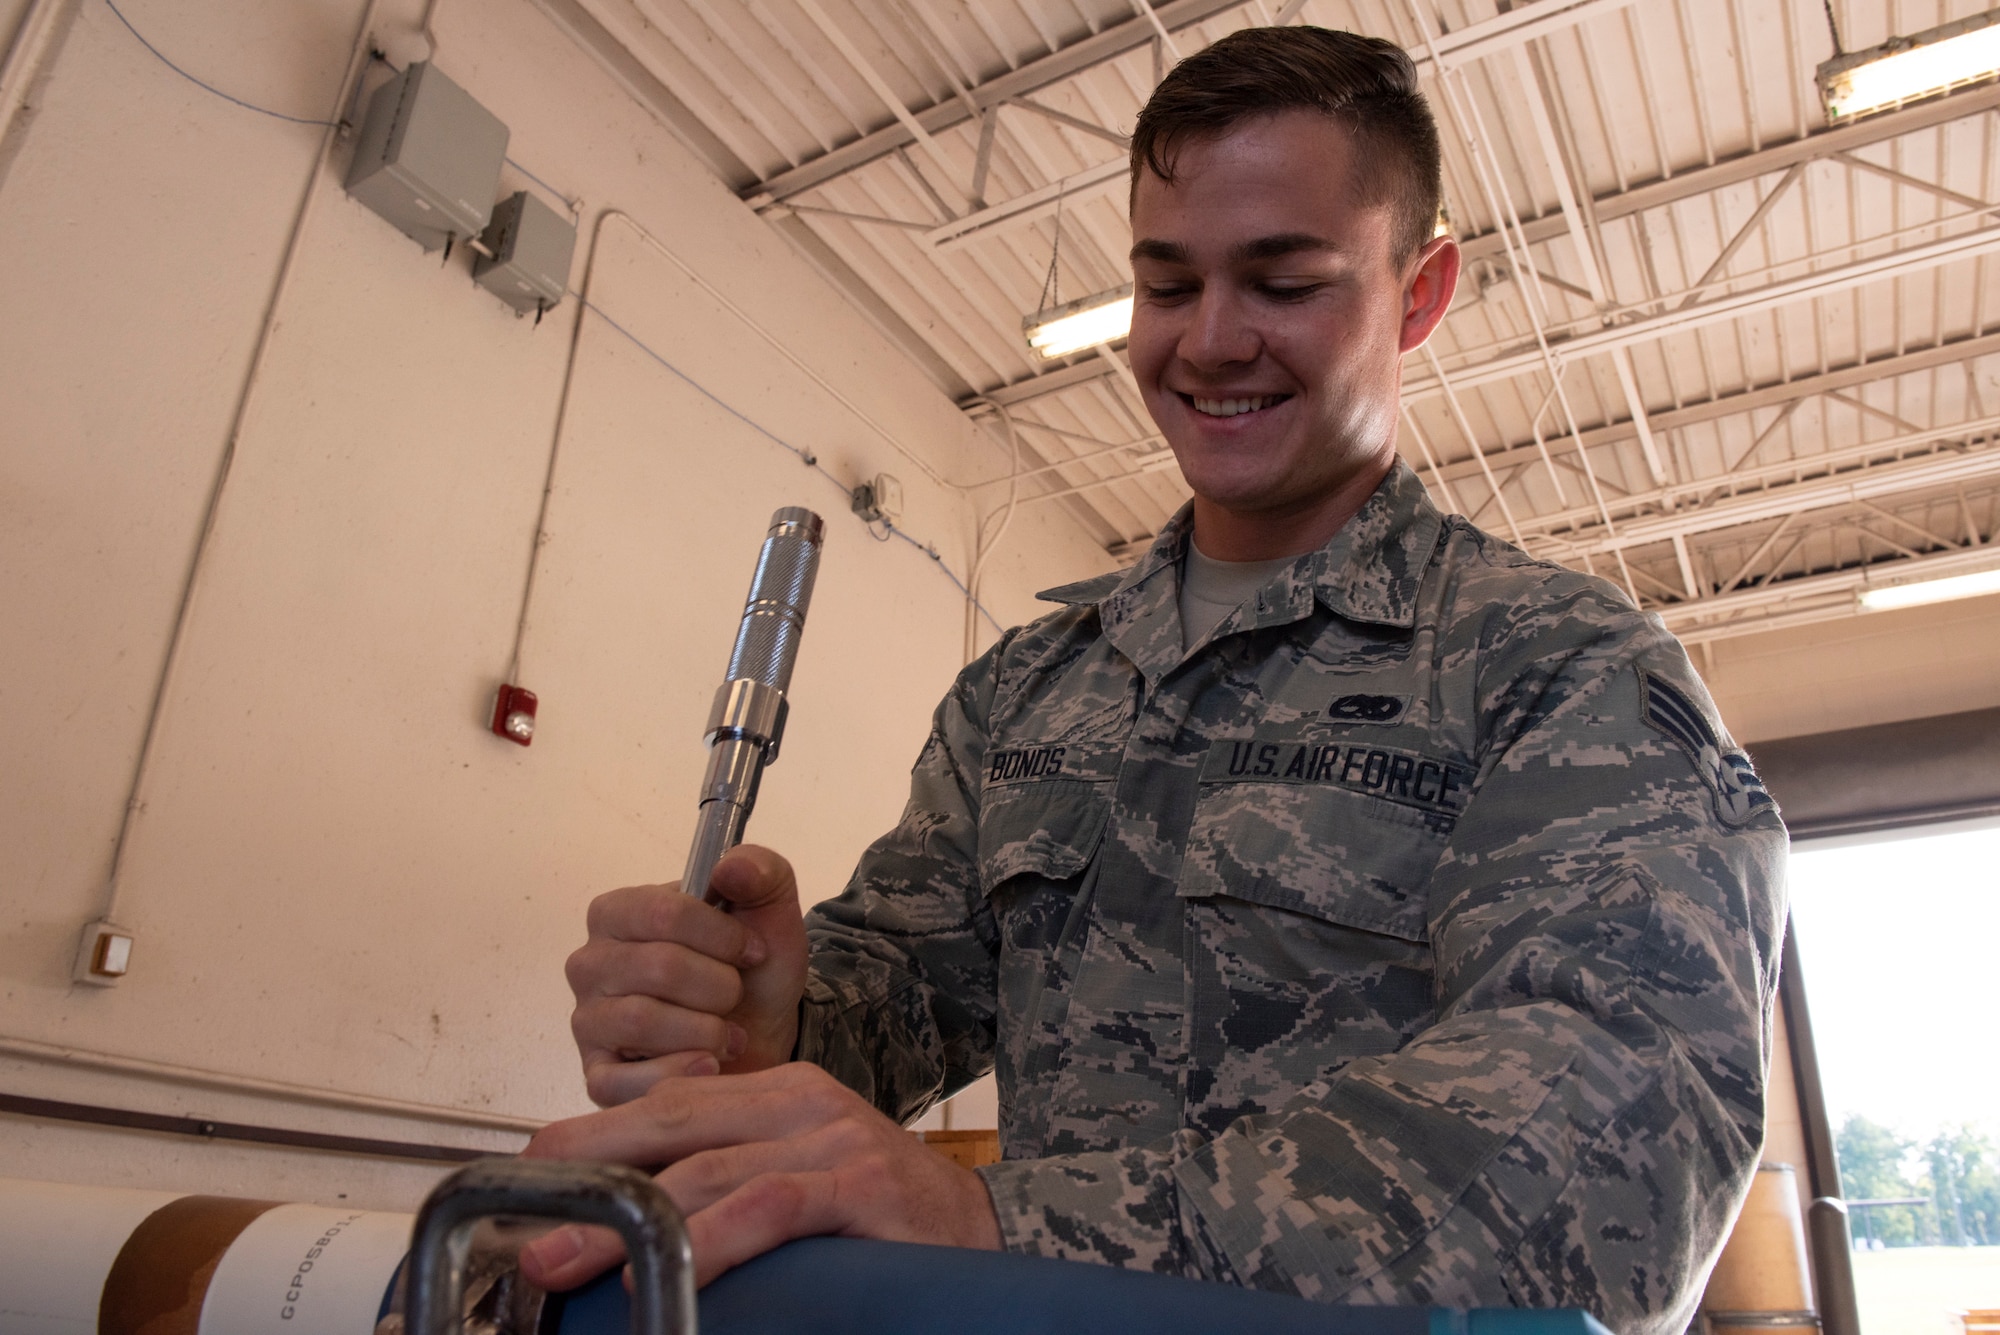 Senior Airman Blake Bonos, 23d Maintenance Squadron conventional maintenance technician, assembles munitions Oct. 17, 2019 , at Moody Air Force Base, Ga. The Munitions Flight Production Division is responsible for maintaining, inspecting, producing and delivering ammo to Moody’s munitions holding area. Following technical orders for operations and procedures allow the Airmen to minimize errors in their stock of over 52 million munitions, ensuring the fighter squadrons are prepared for future operations. (U.S. Air Force photo by Airman Elijah M. Dority)